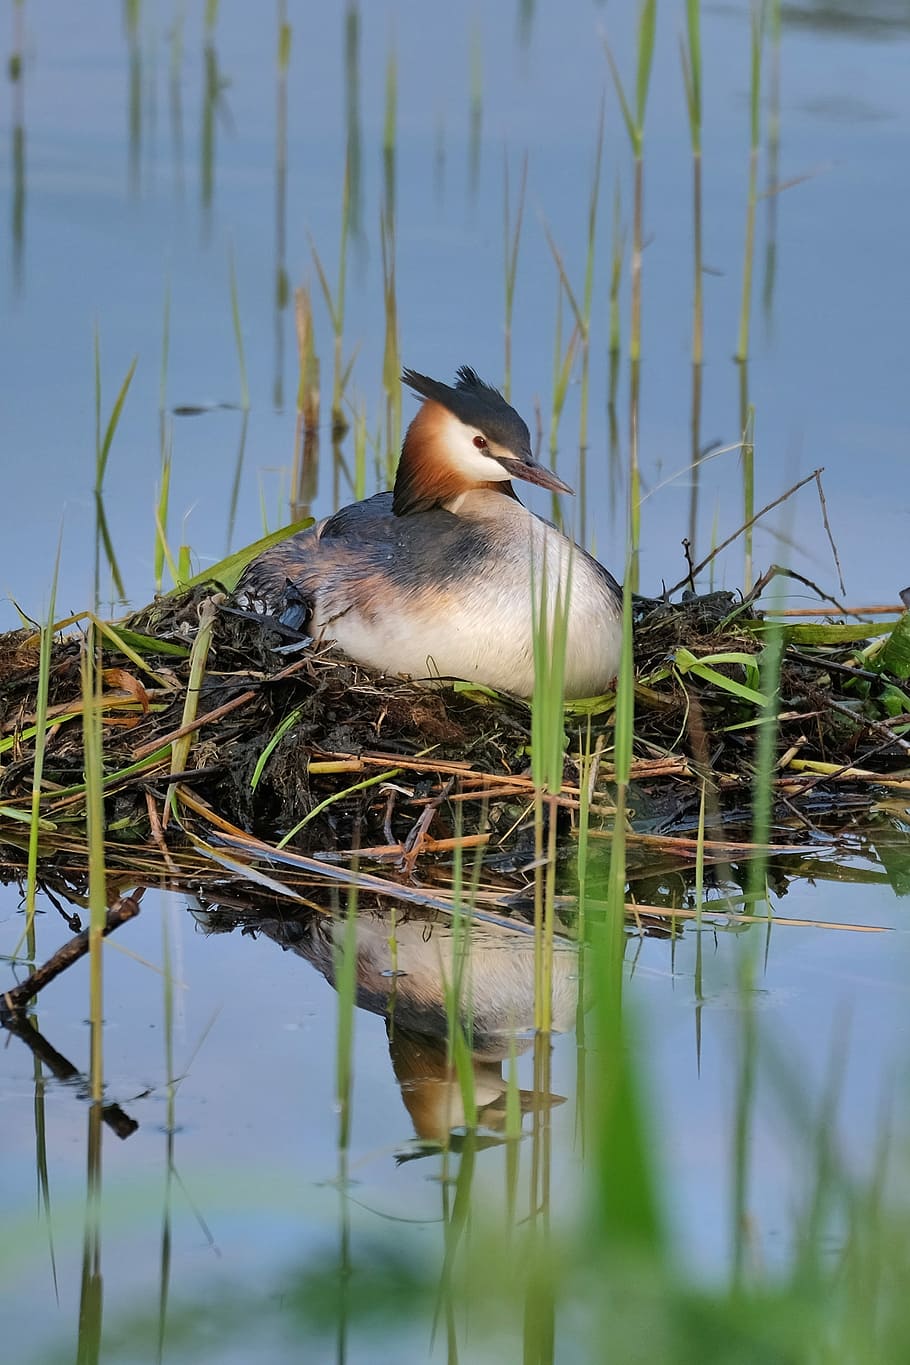 Great Crested Grebe, Nest, Breed, Reed, water bird, brood care, breeding water, water reflection, lake, animals in the wild